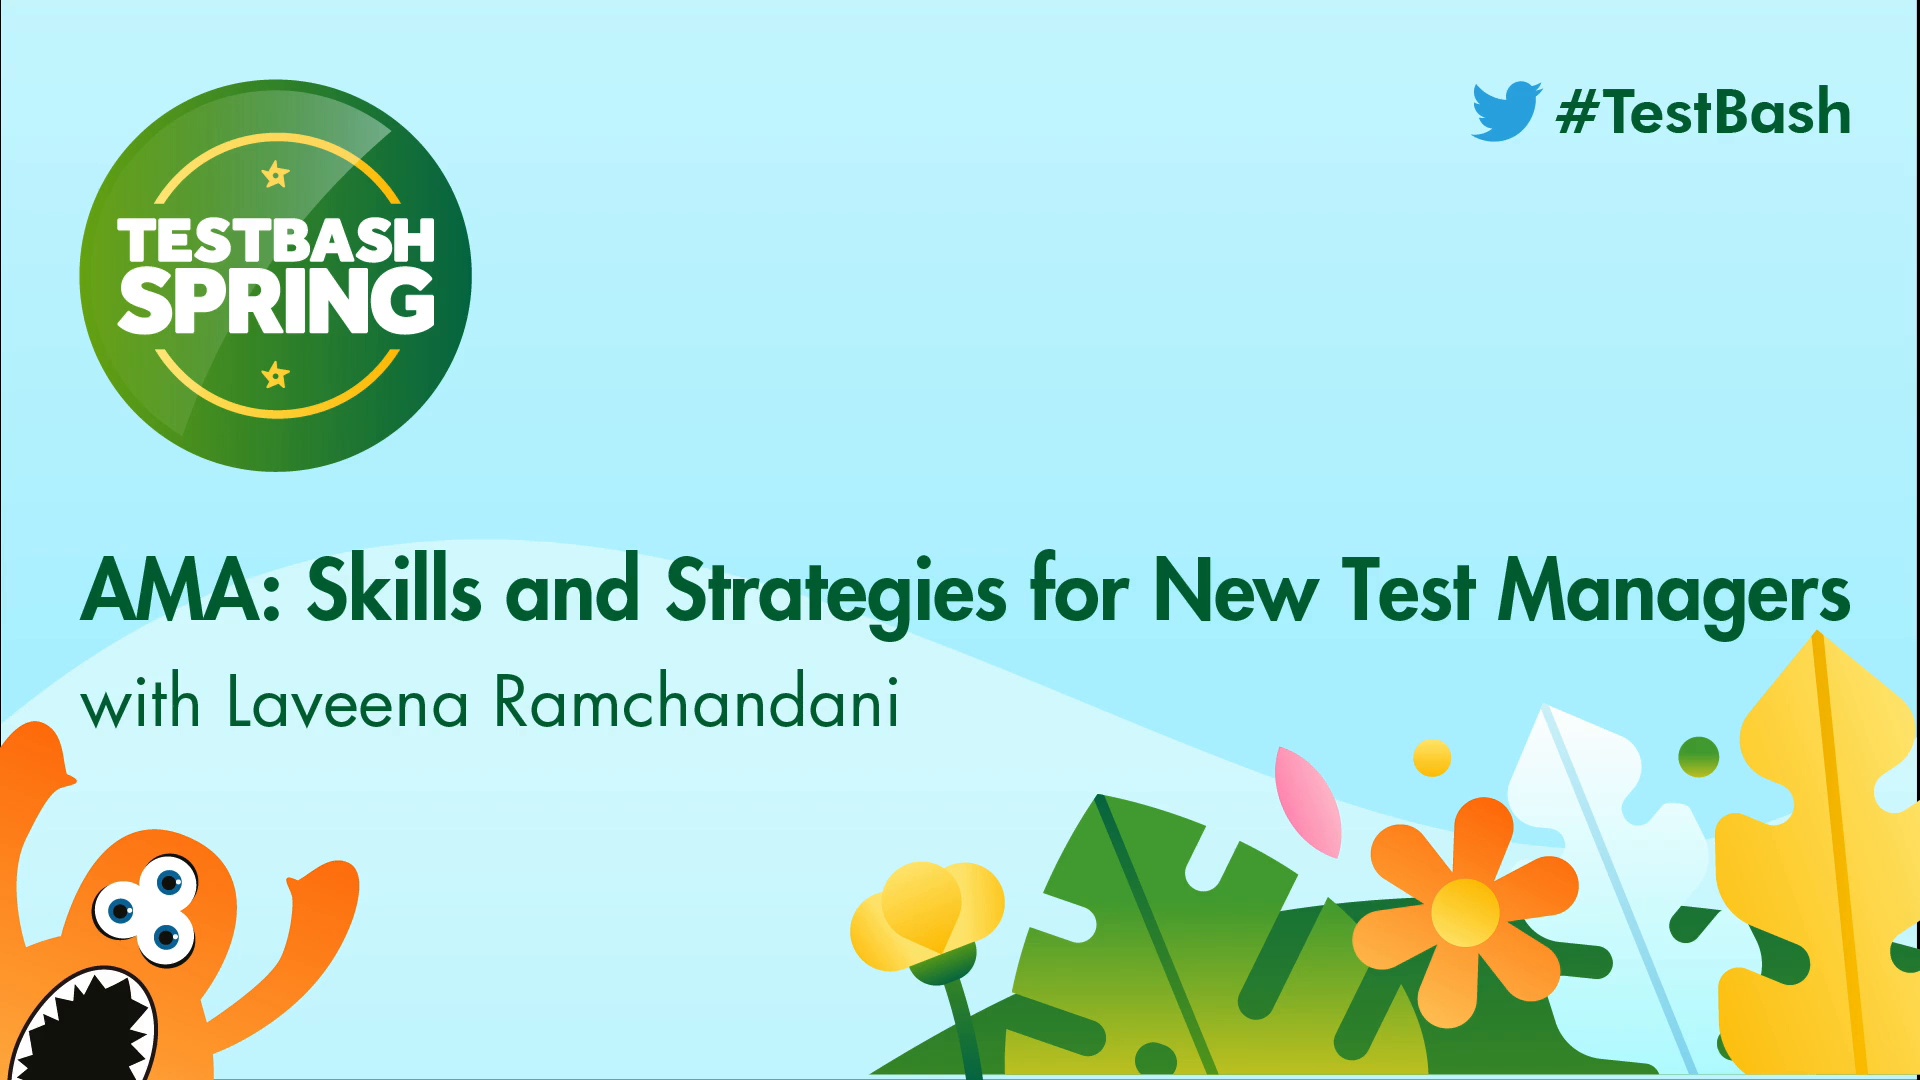 Ask Me Anything: Skills and Strategies for New Test Managers with Laveena Ramchandani